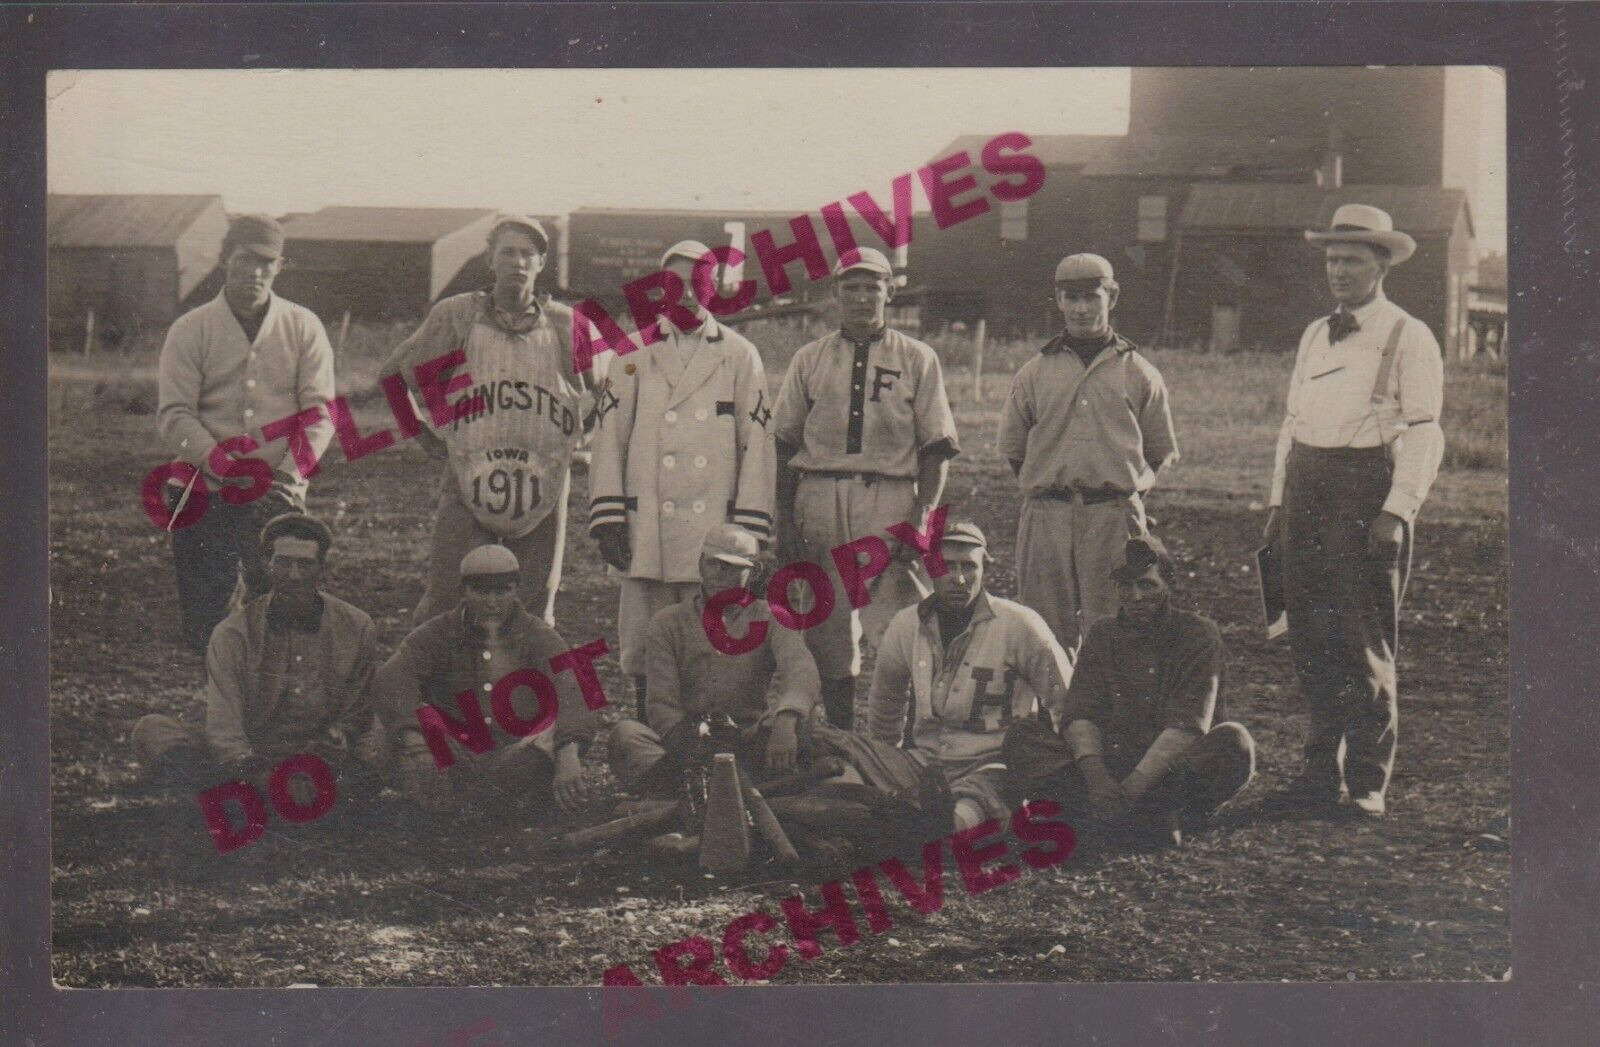 Ringsted IOWA RPPC 1911 BASEBALL TEAM Catcher Chest Ad BILL ANDERSON COLLECTION